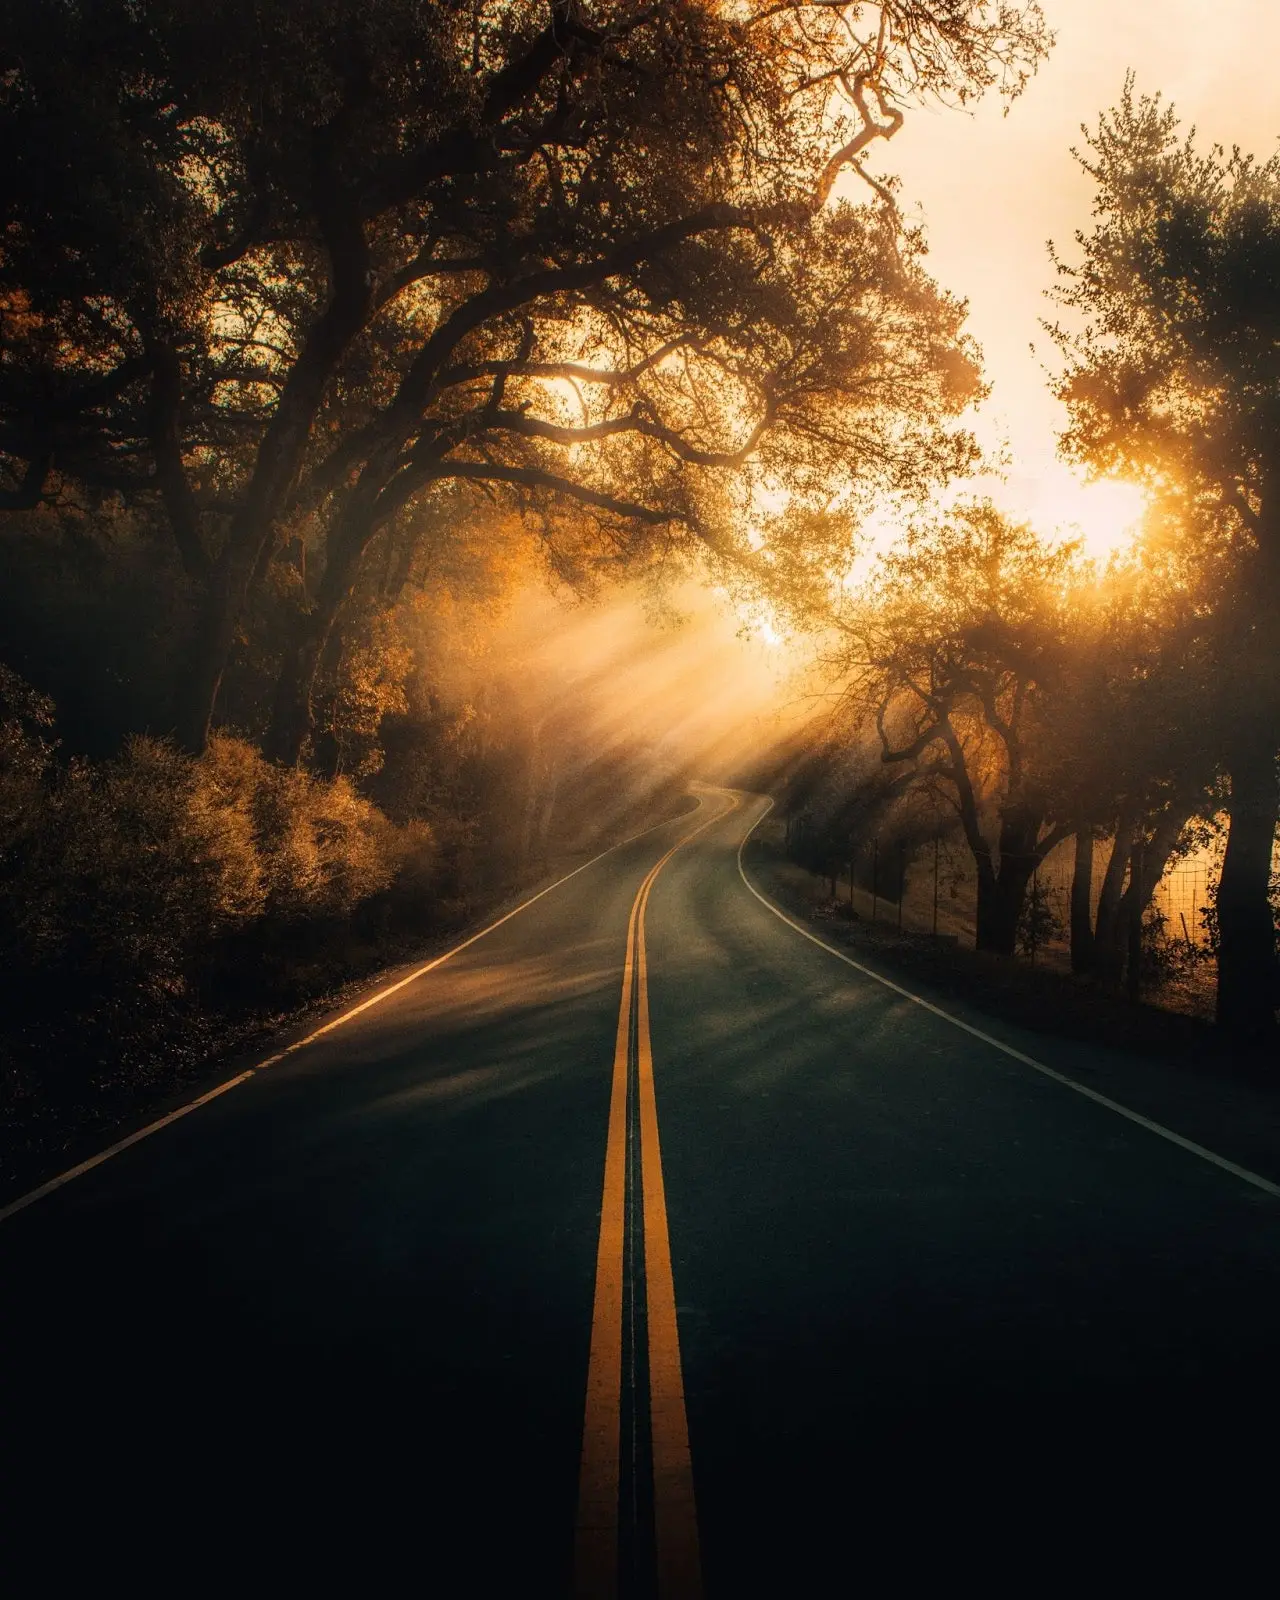 Golden sunrays penetrate the trees shrouding a curvy road.